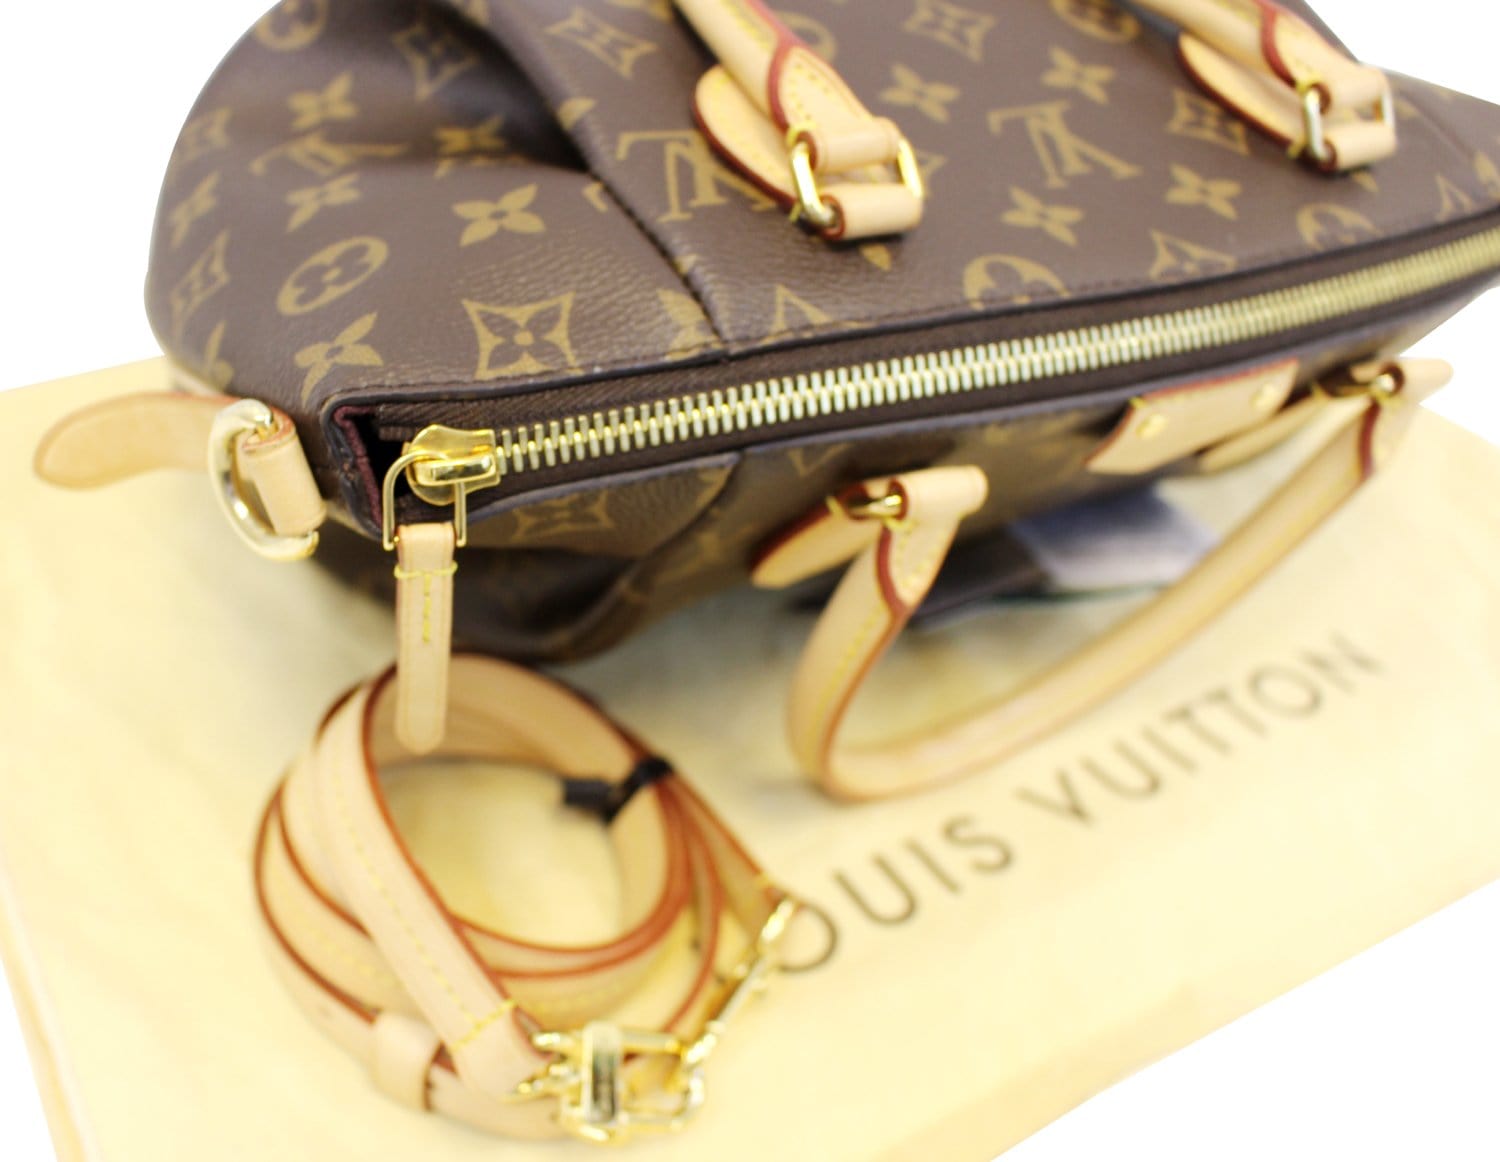 LOUIS VUITTON TURENNE PM FIRST IMPRESSIONS 